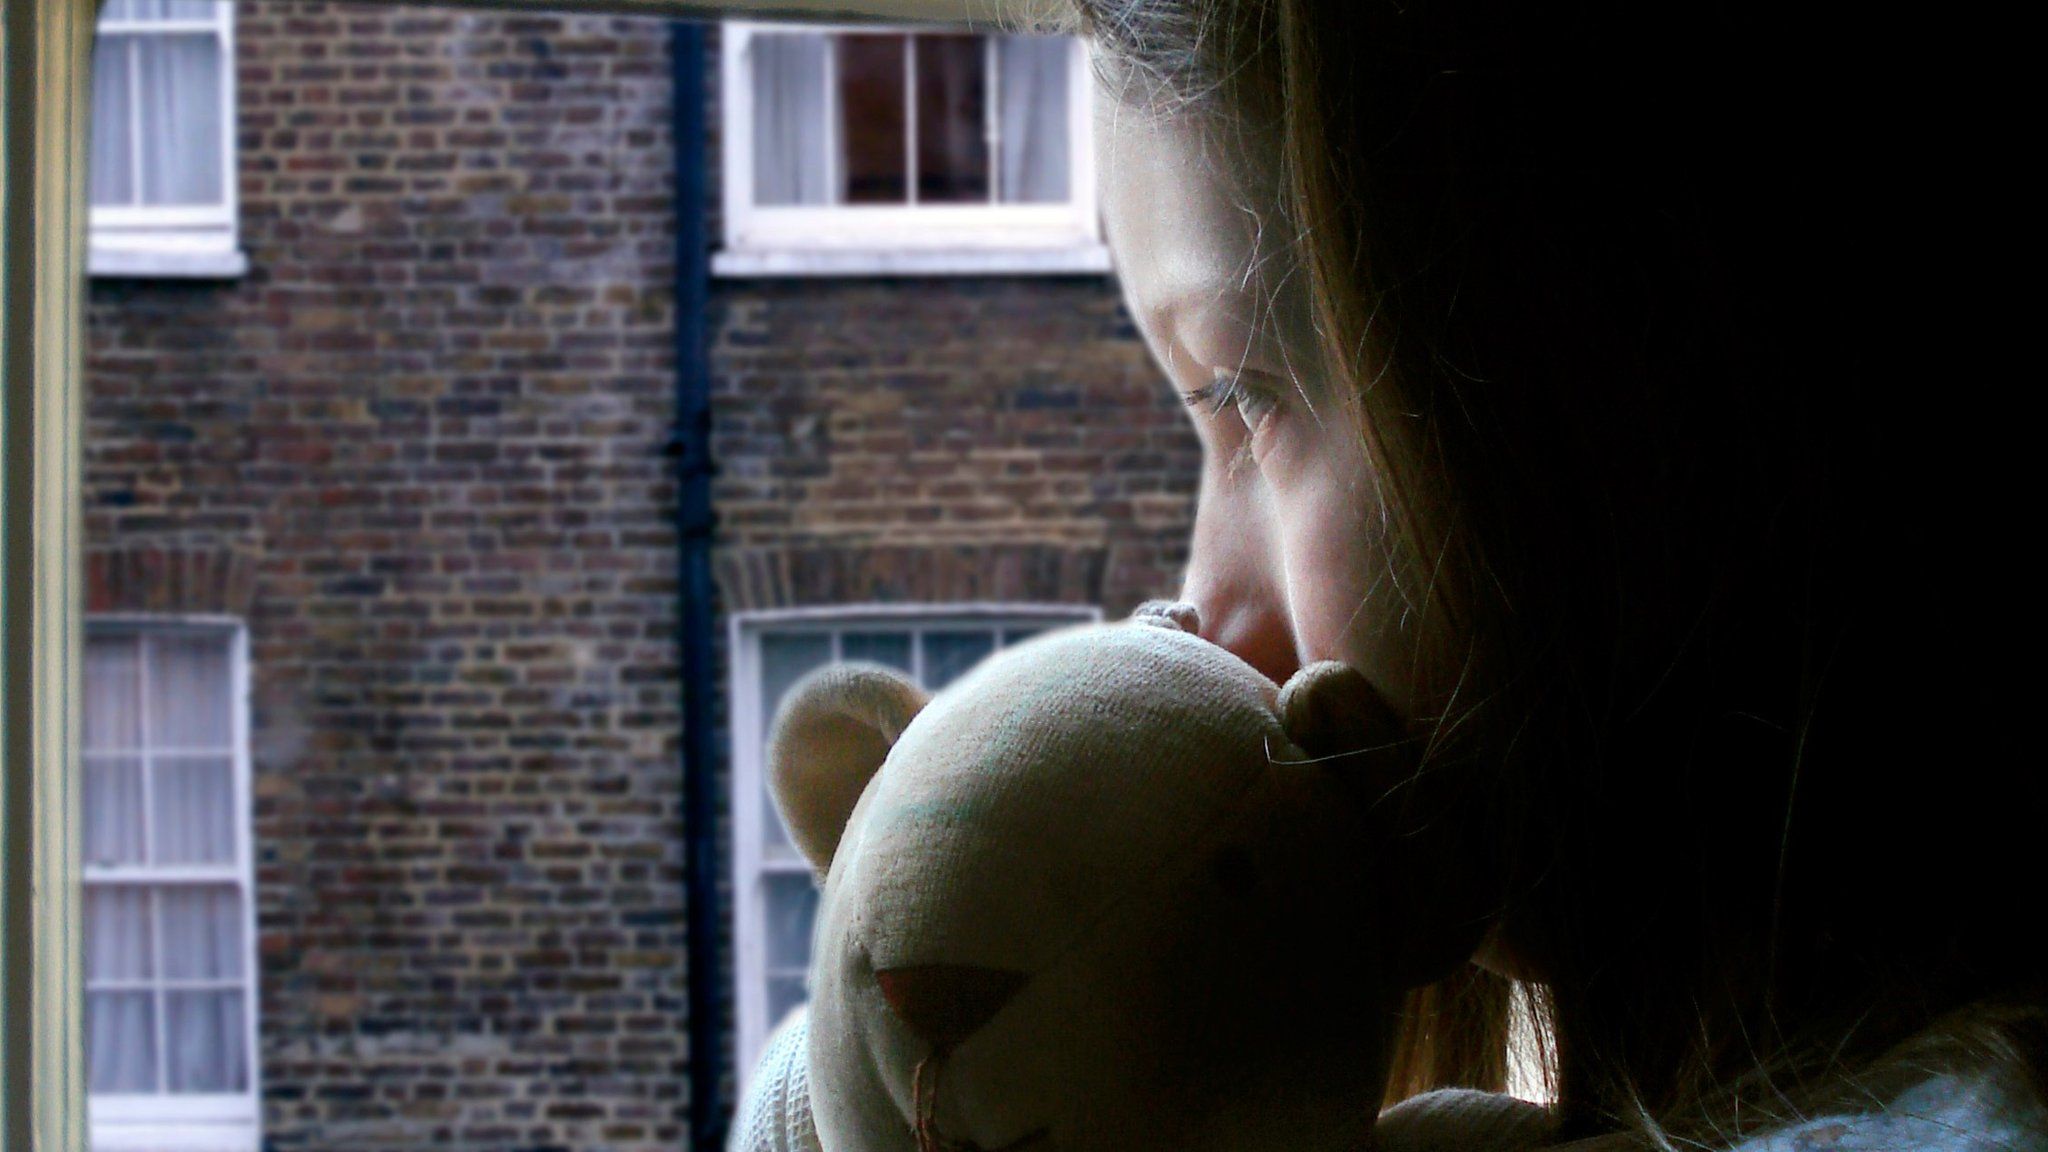 Young girl looking out of a window holding a teddy bear.